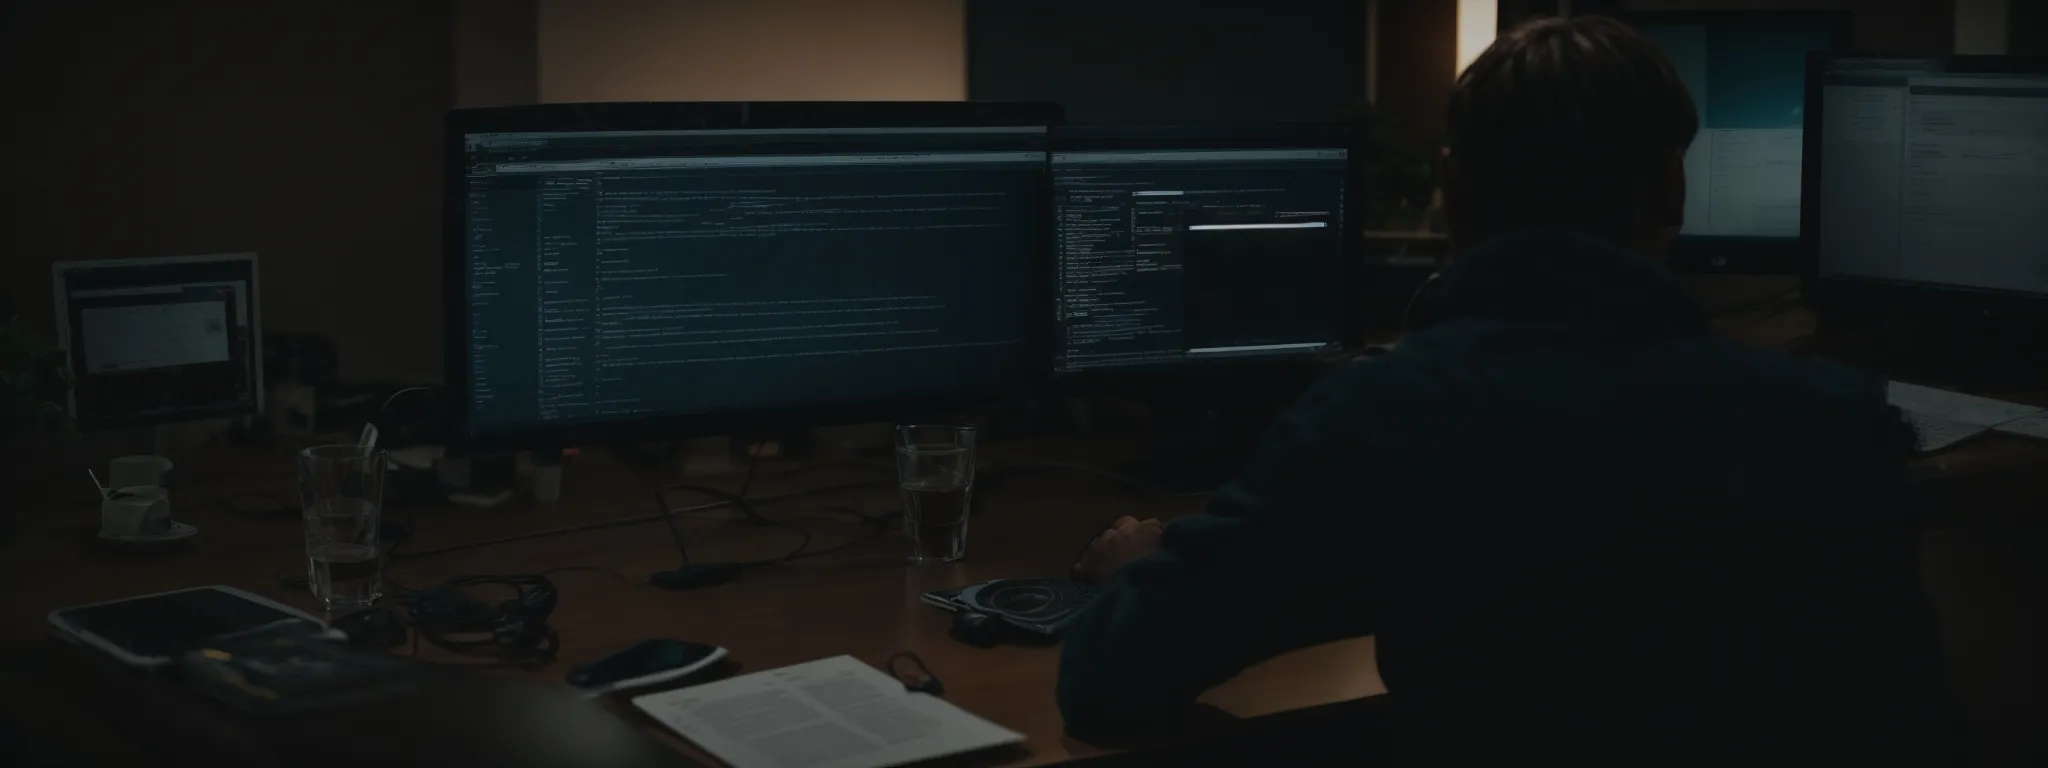 a person sitting at a computer with multiple browser tabs open, indicating active research and strategy planning.